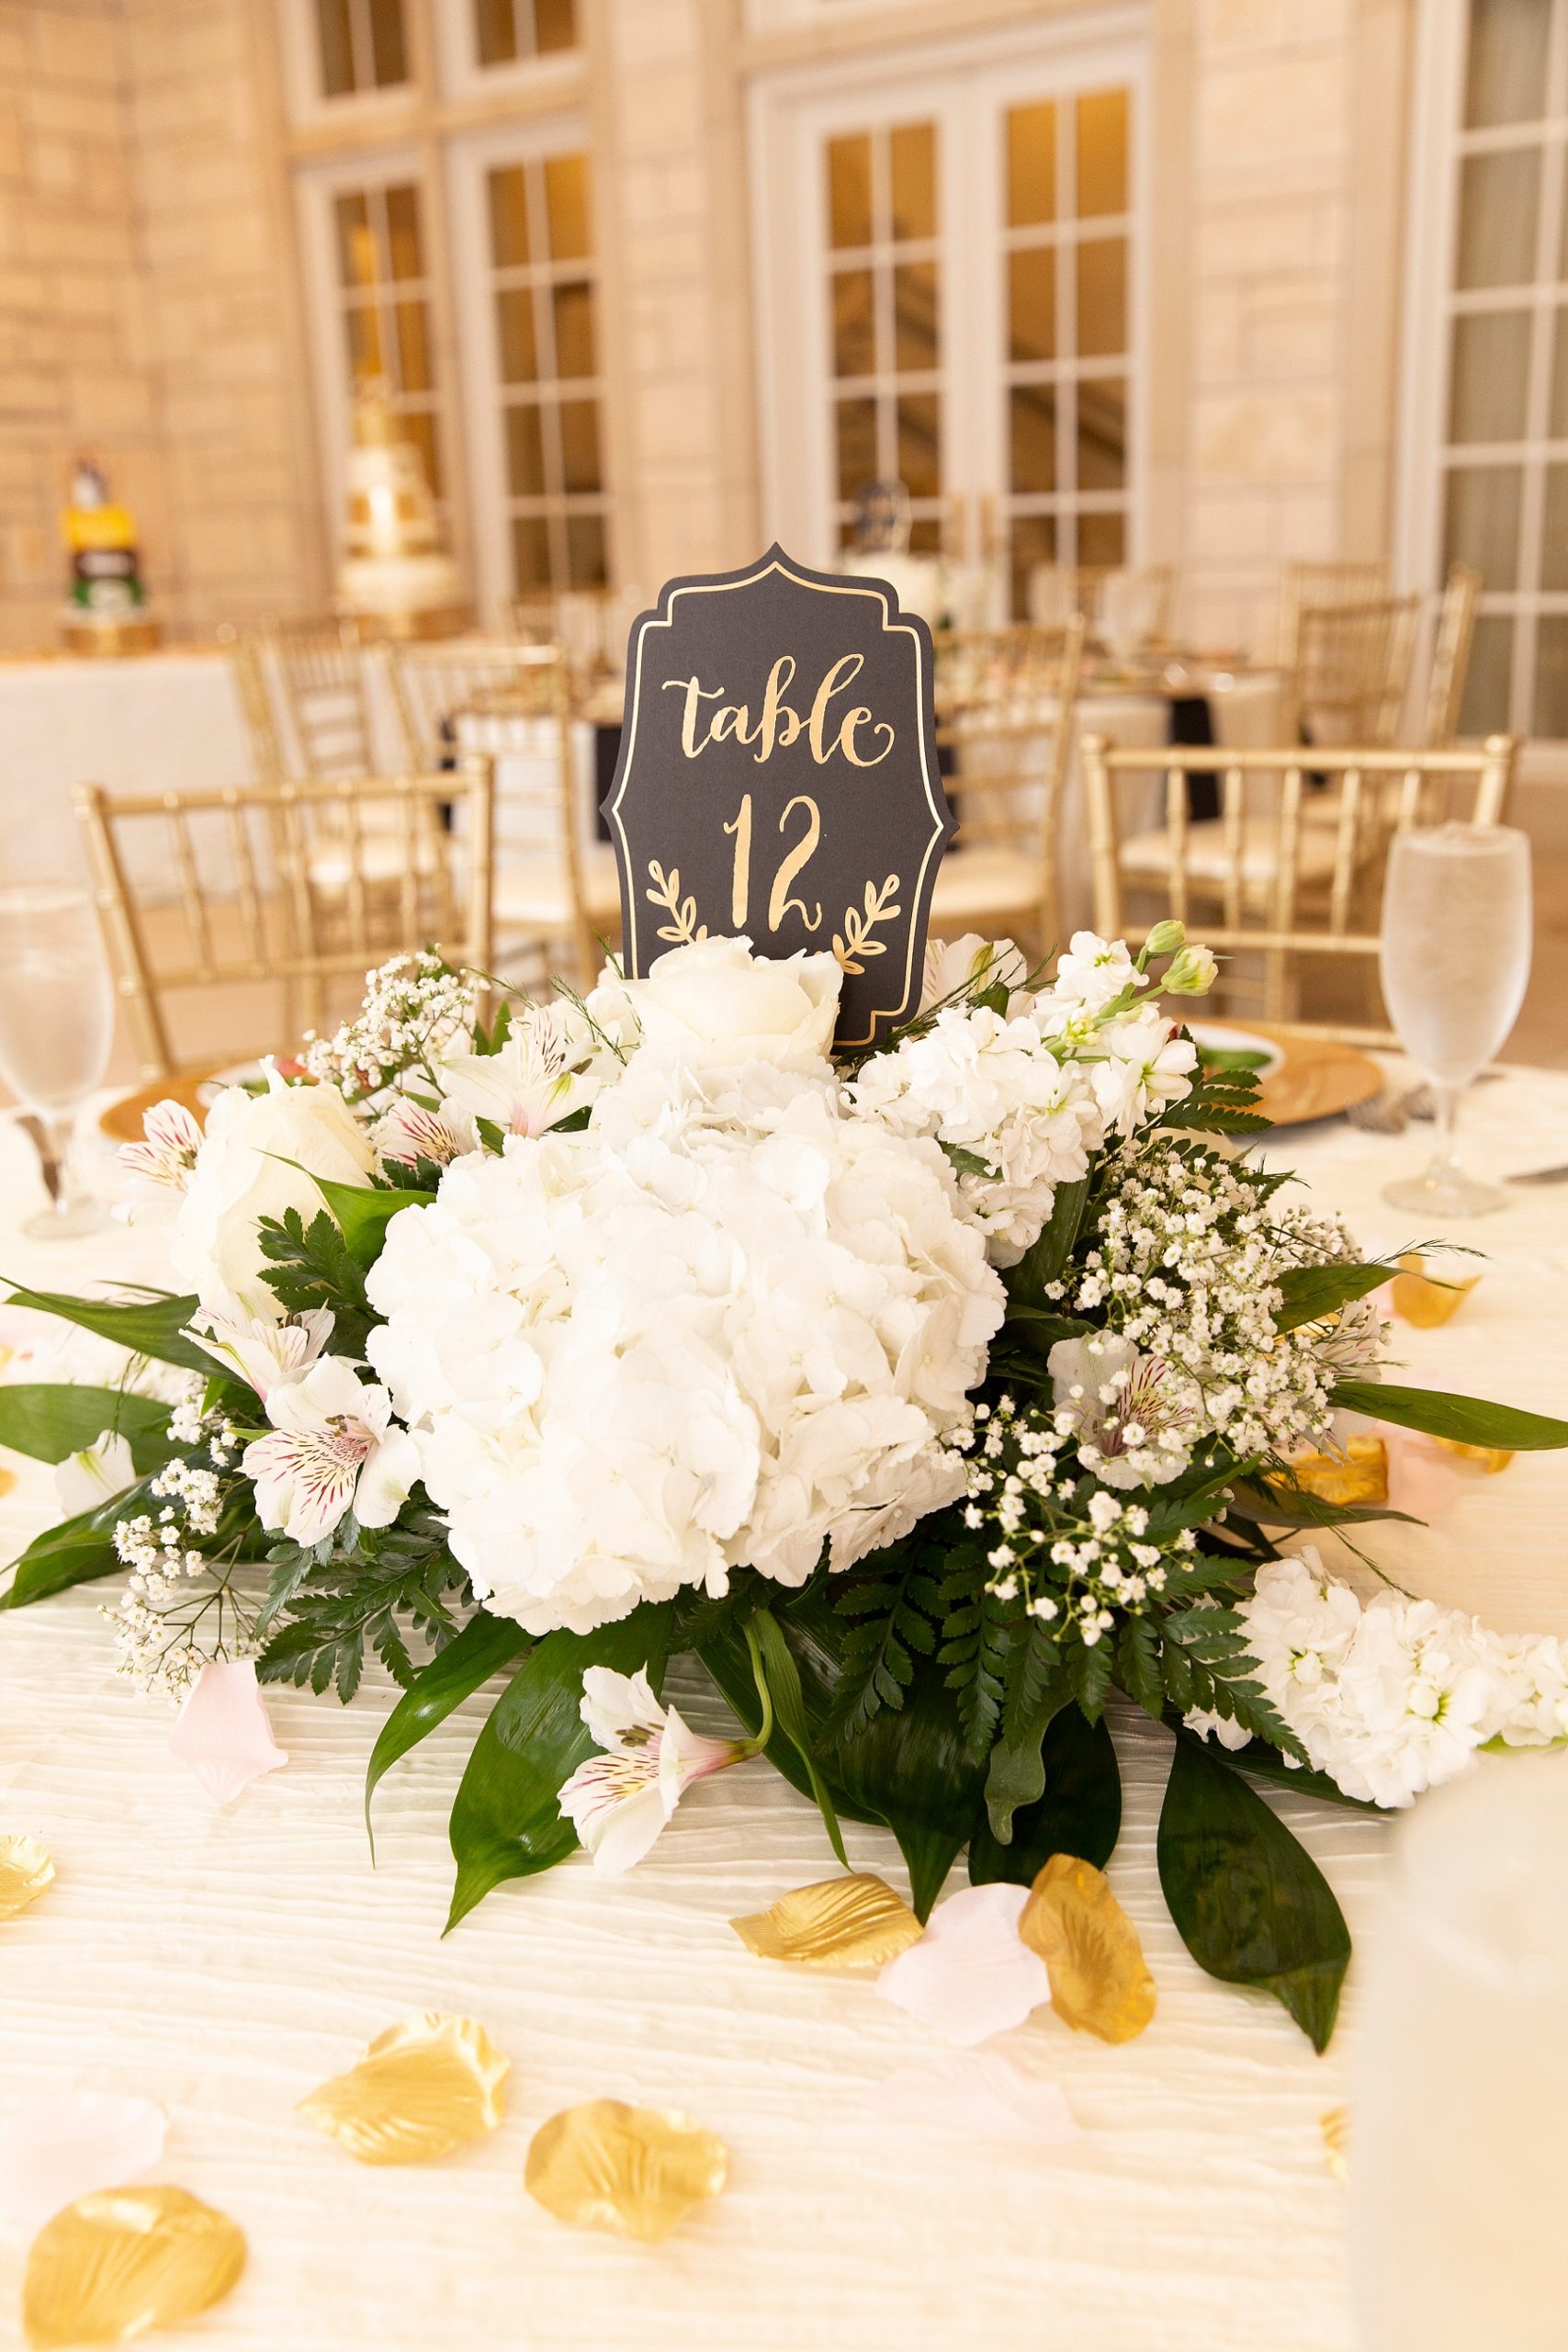 wedding centerpieces with ivory flowers and gold rose petals photographed by Randi Michelle Weddings